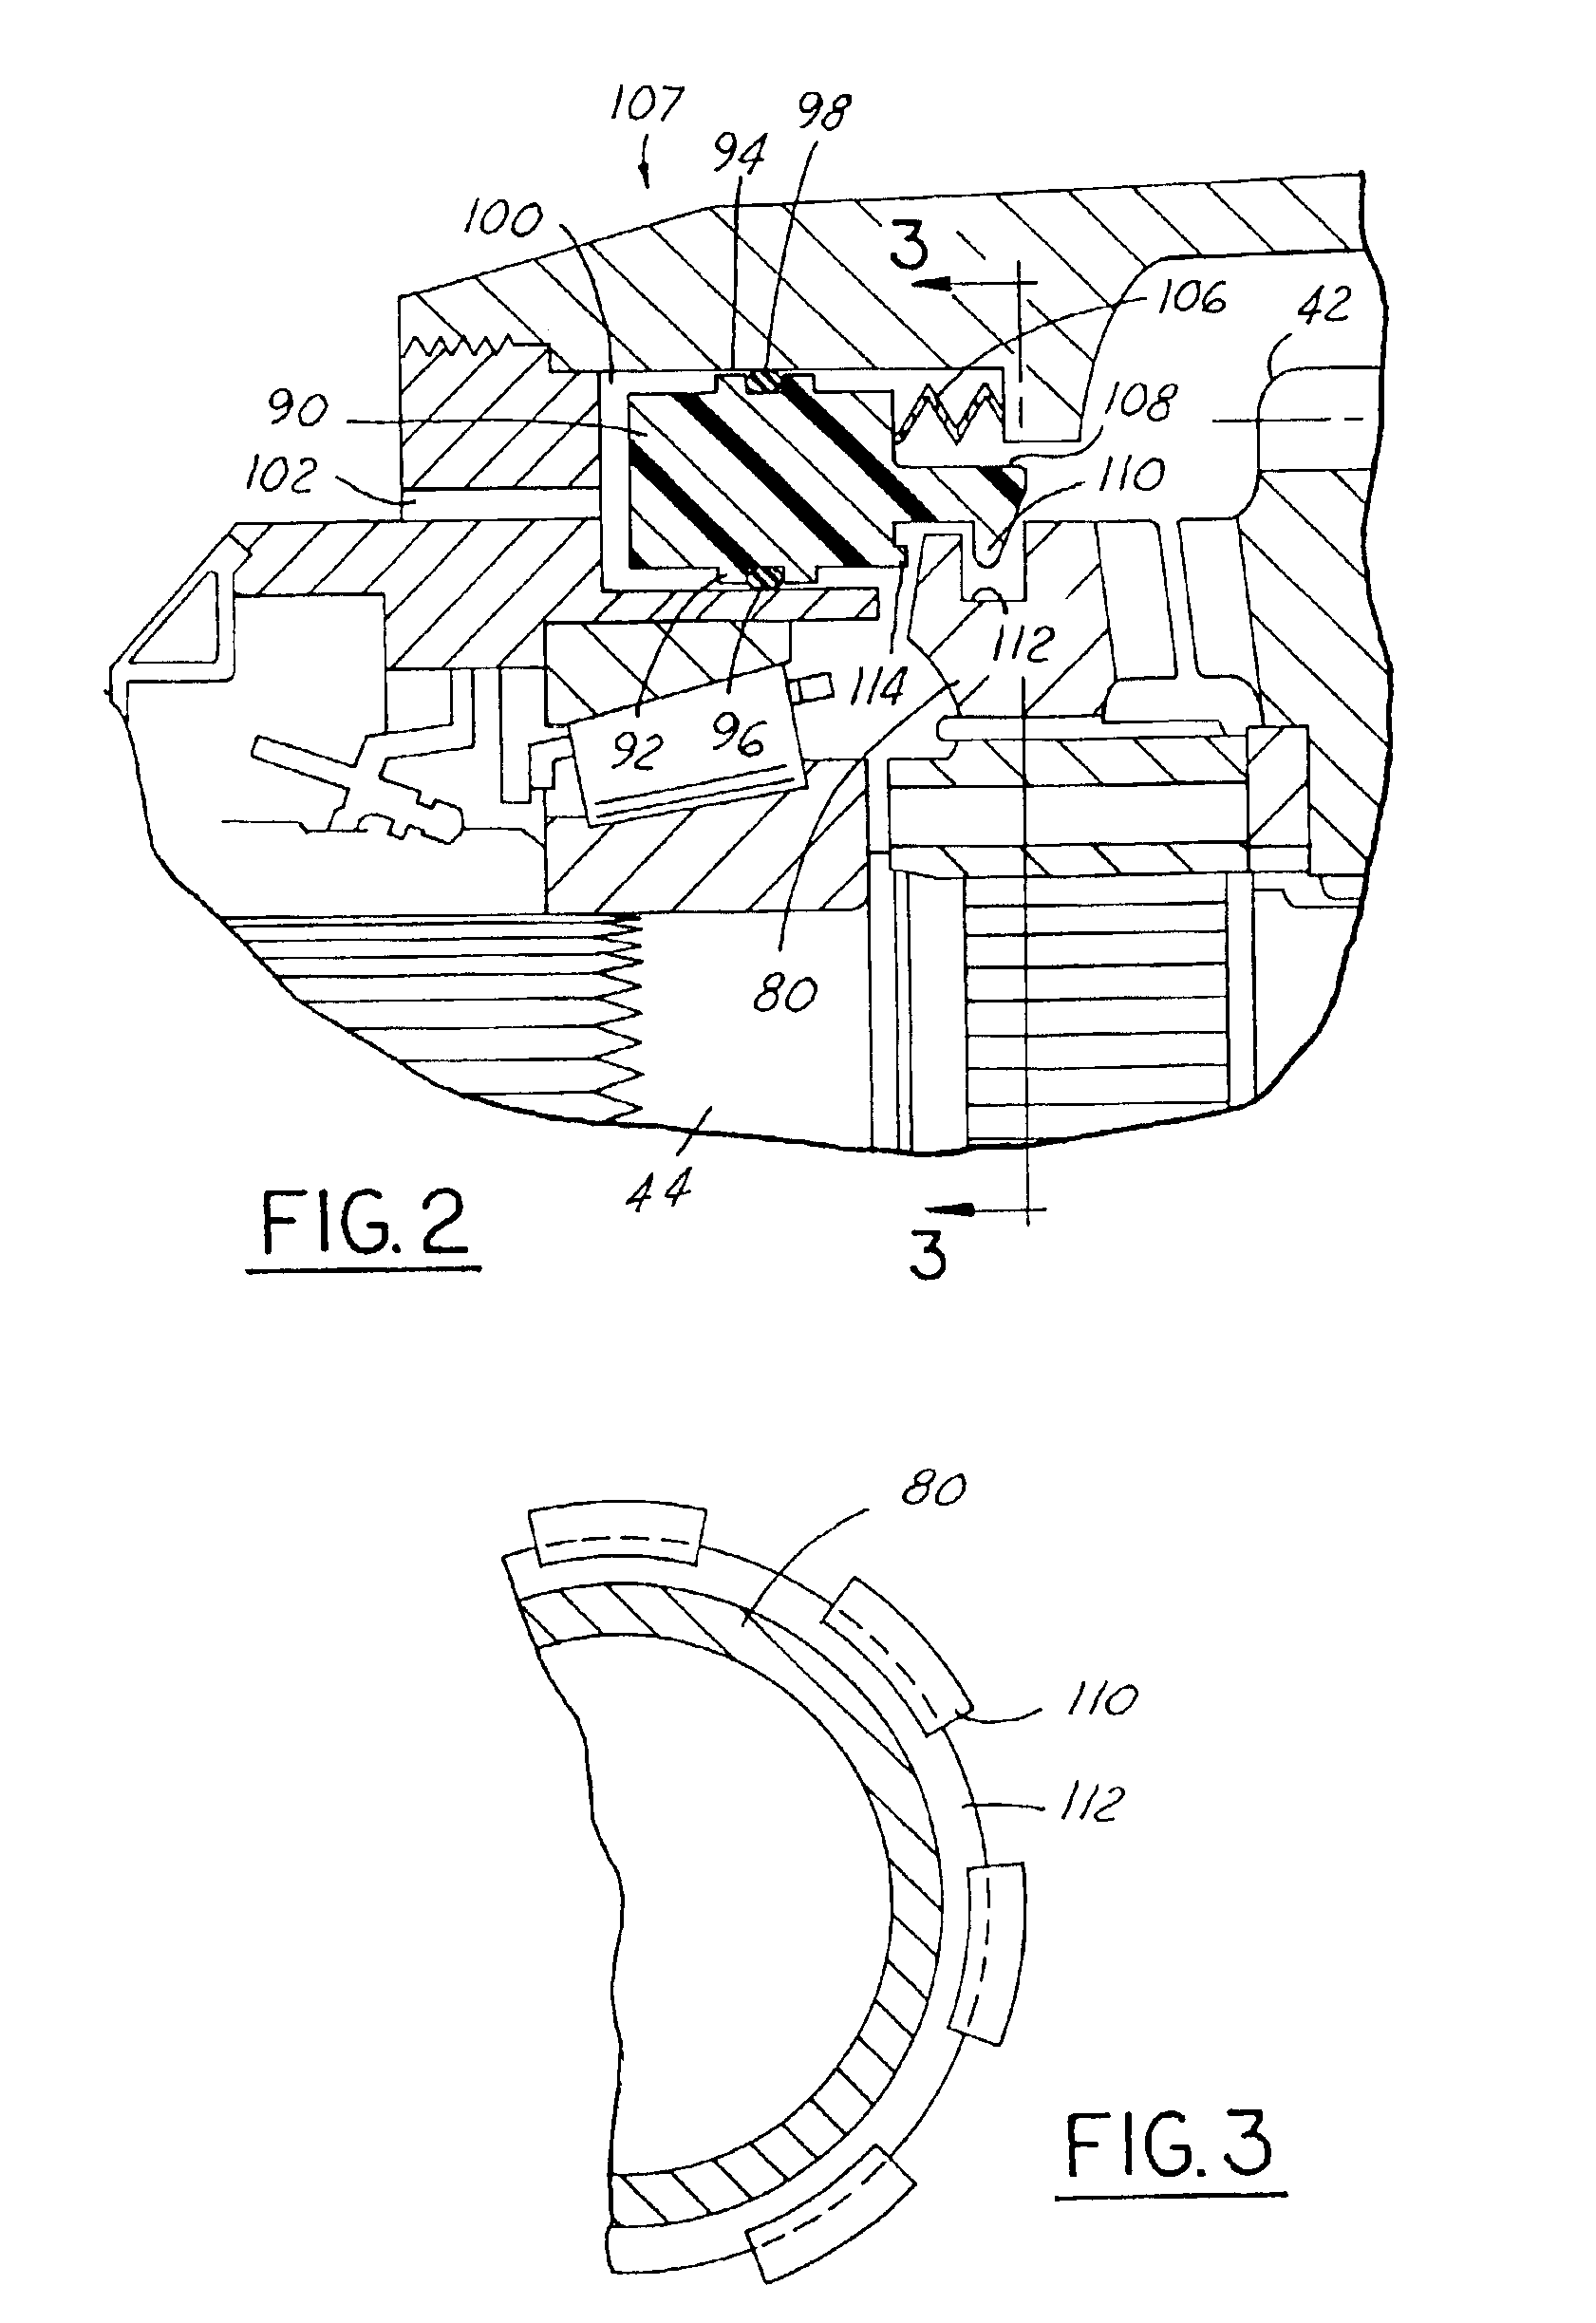 Concentric shift system for engaging an interaxle differential lock